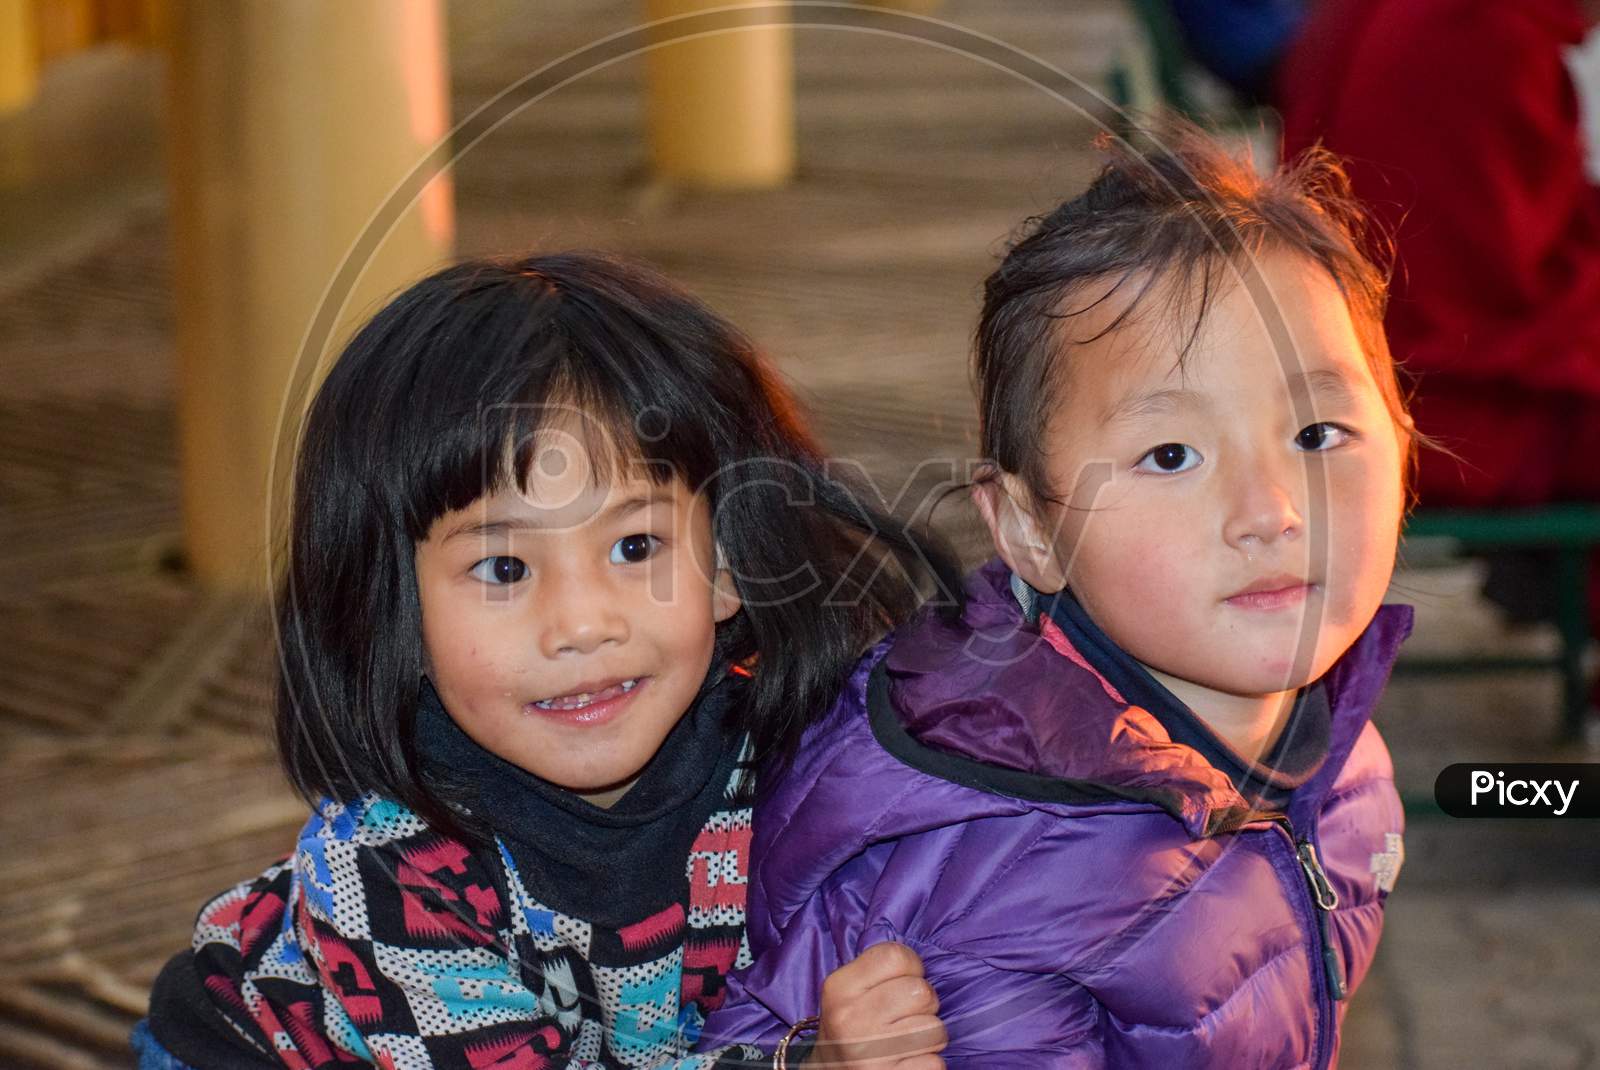 Dharamshala, India 2016 : Two Cute Chinese girls playing and posing for photographs. Images are captured in Dharamshala which is considered as a place of political asylum for Dalai Lama